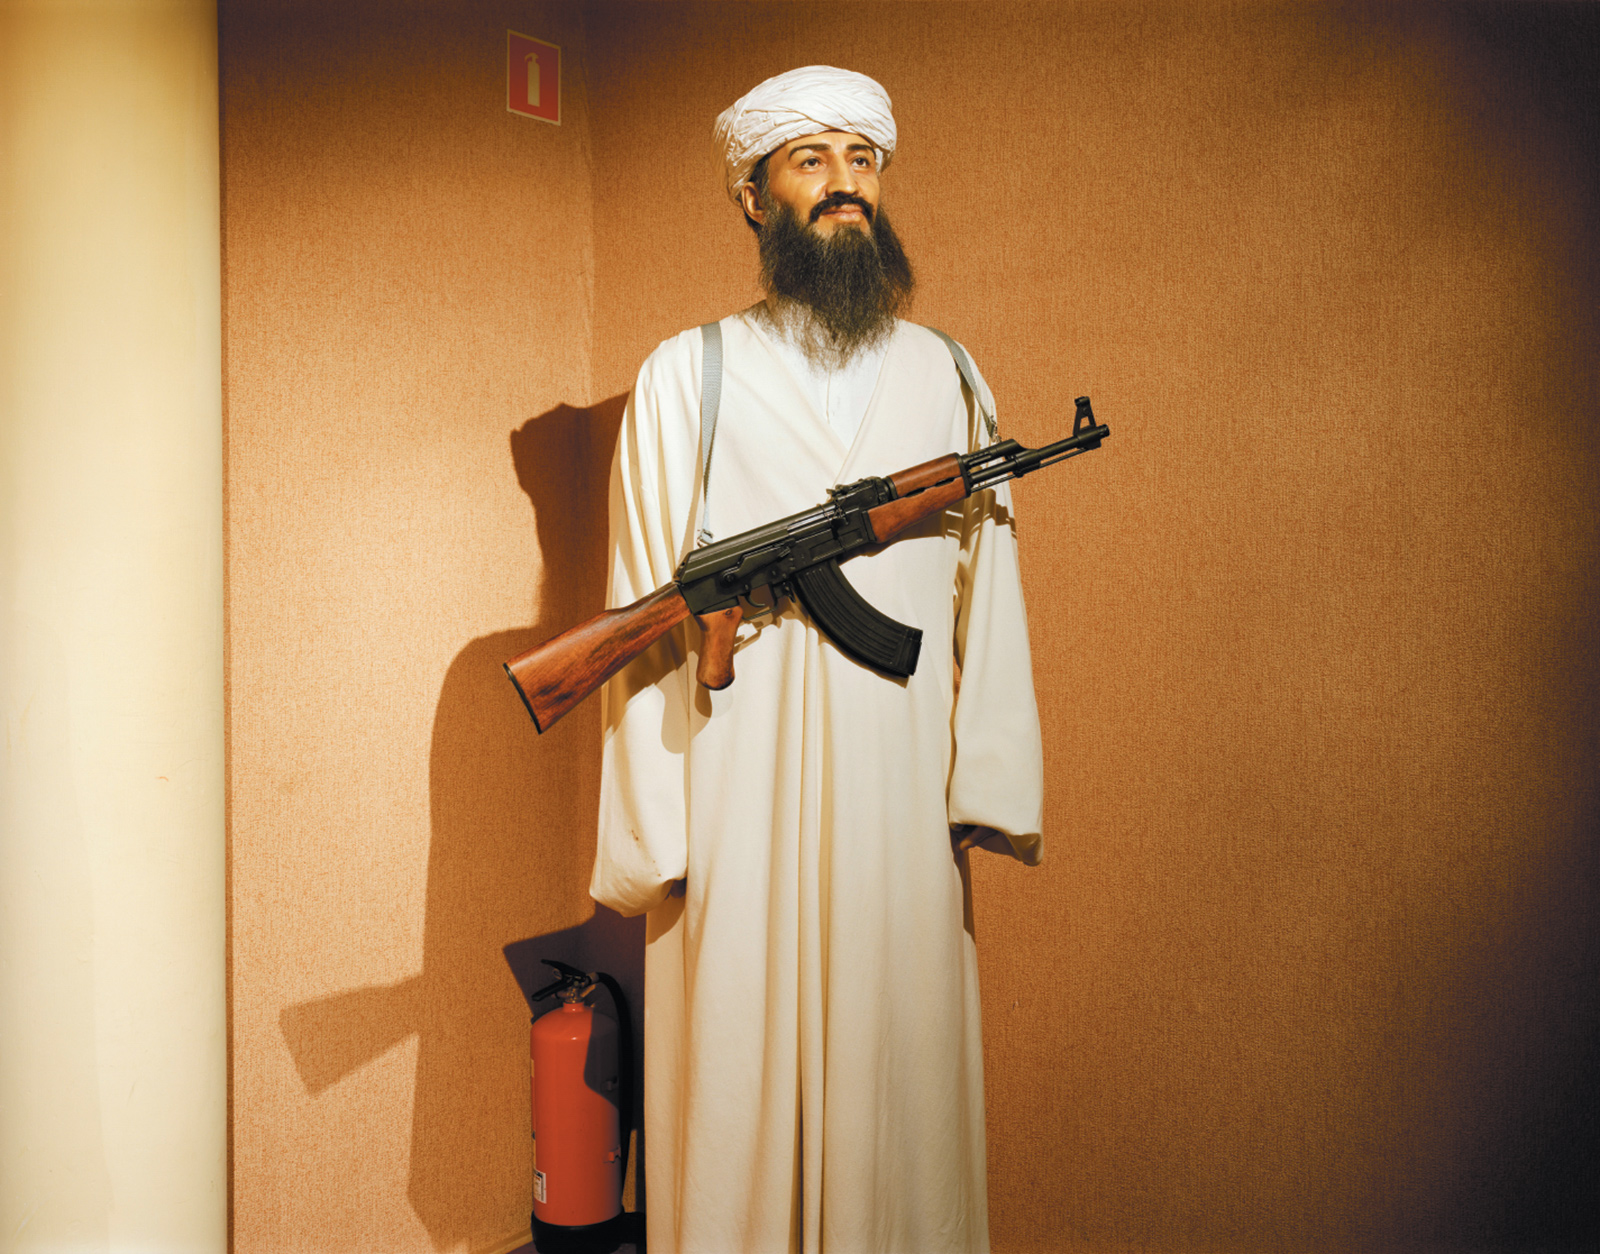 Sy Hersh and Osama bin Laden: The Right and the Wrong